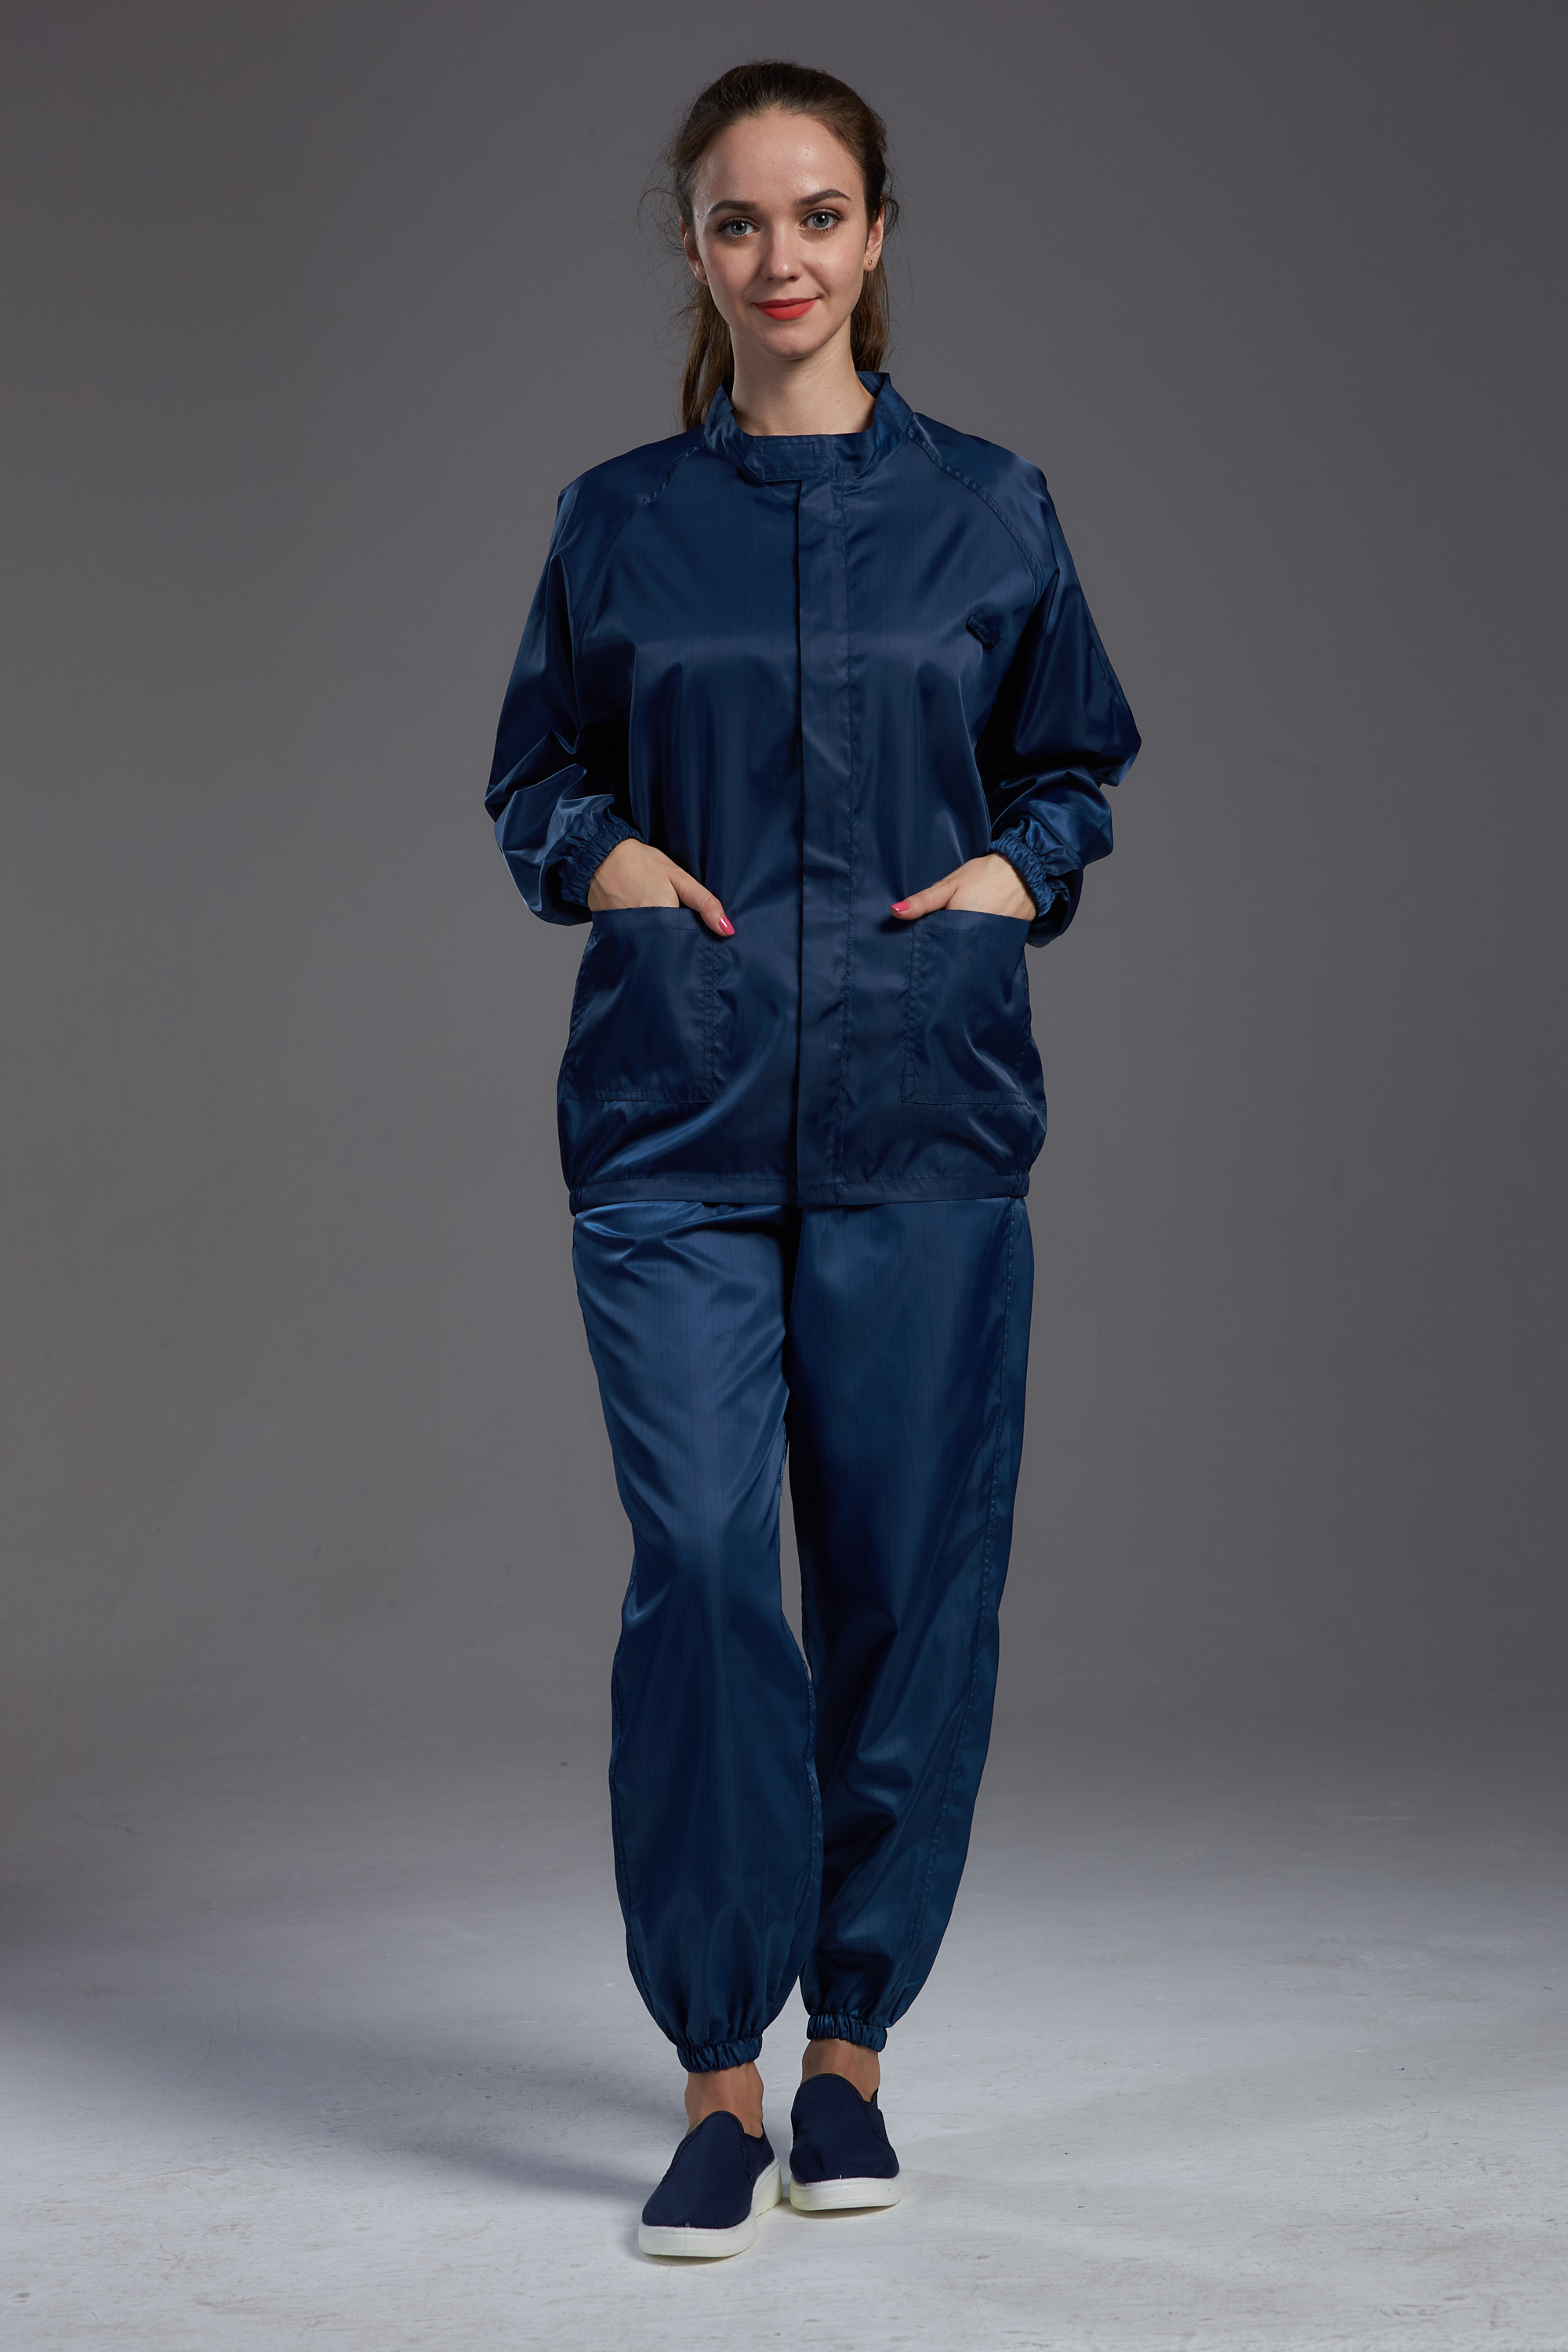 Best Dark Blue Unisex Esd Antistatic cleanroom Jacket and pants , sterilization and dust free wholesale